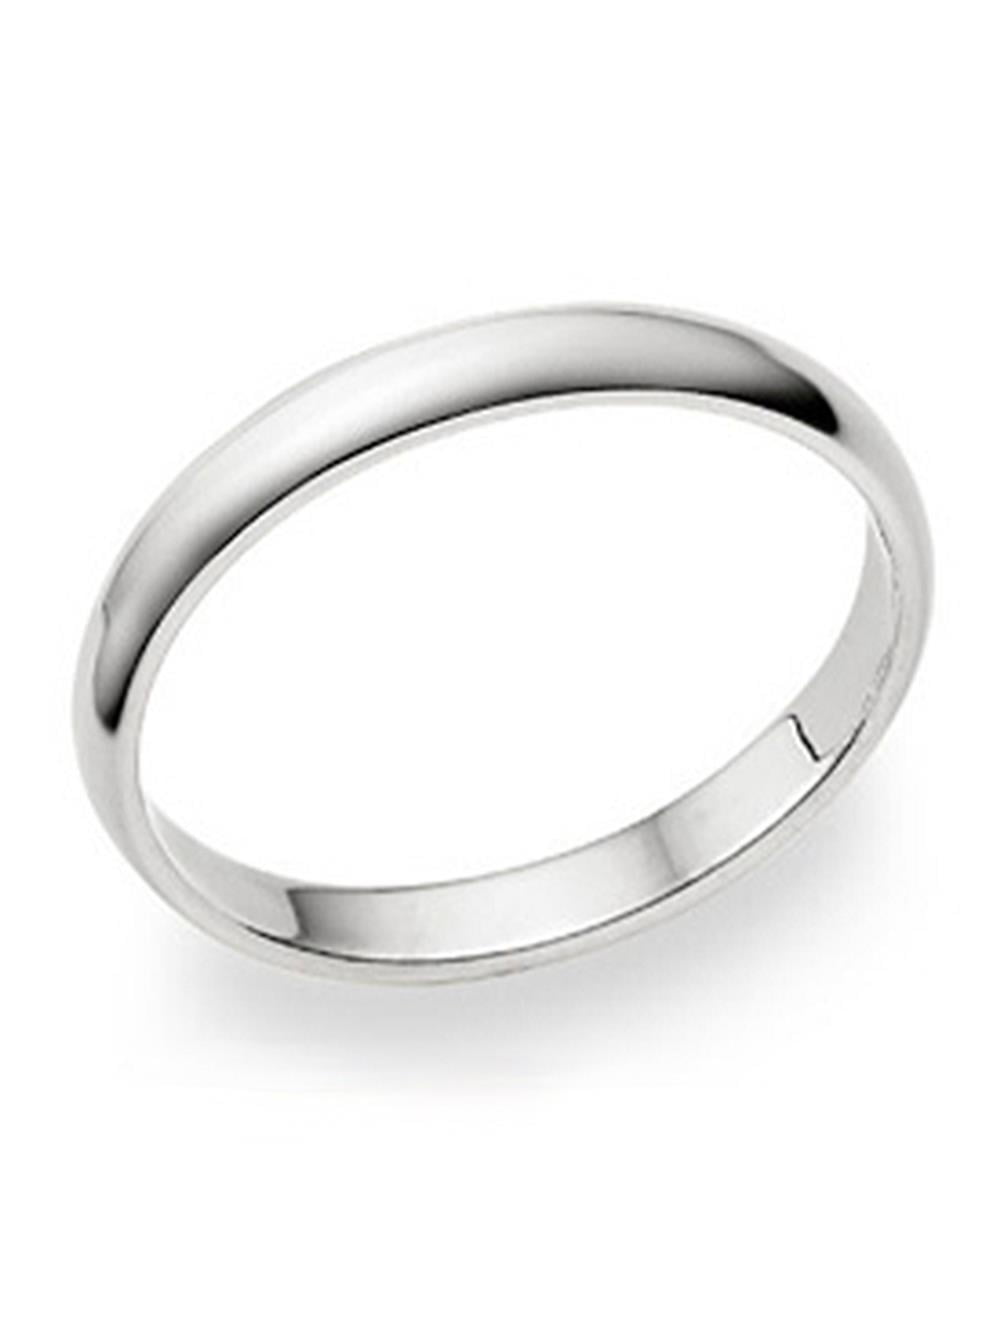 5mm Plain Dome Wedding Band in Plain Solid 925 Sterling Silver Women's Men's 